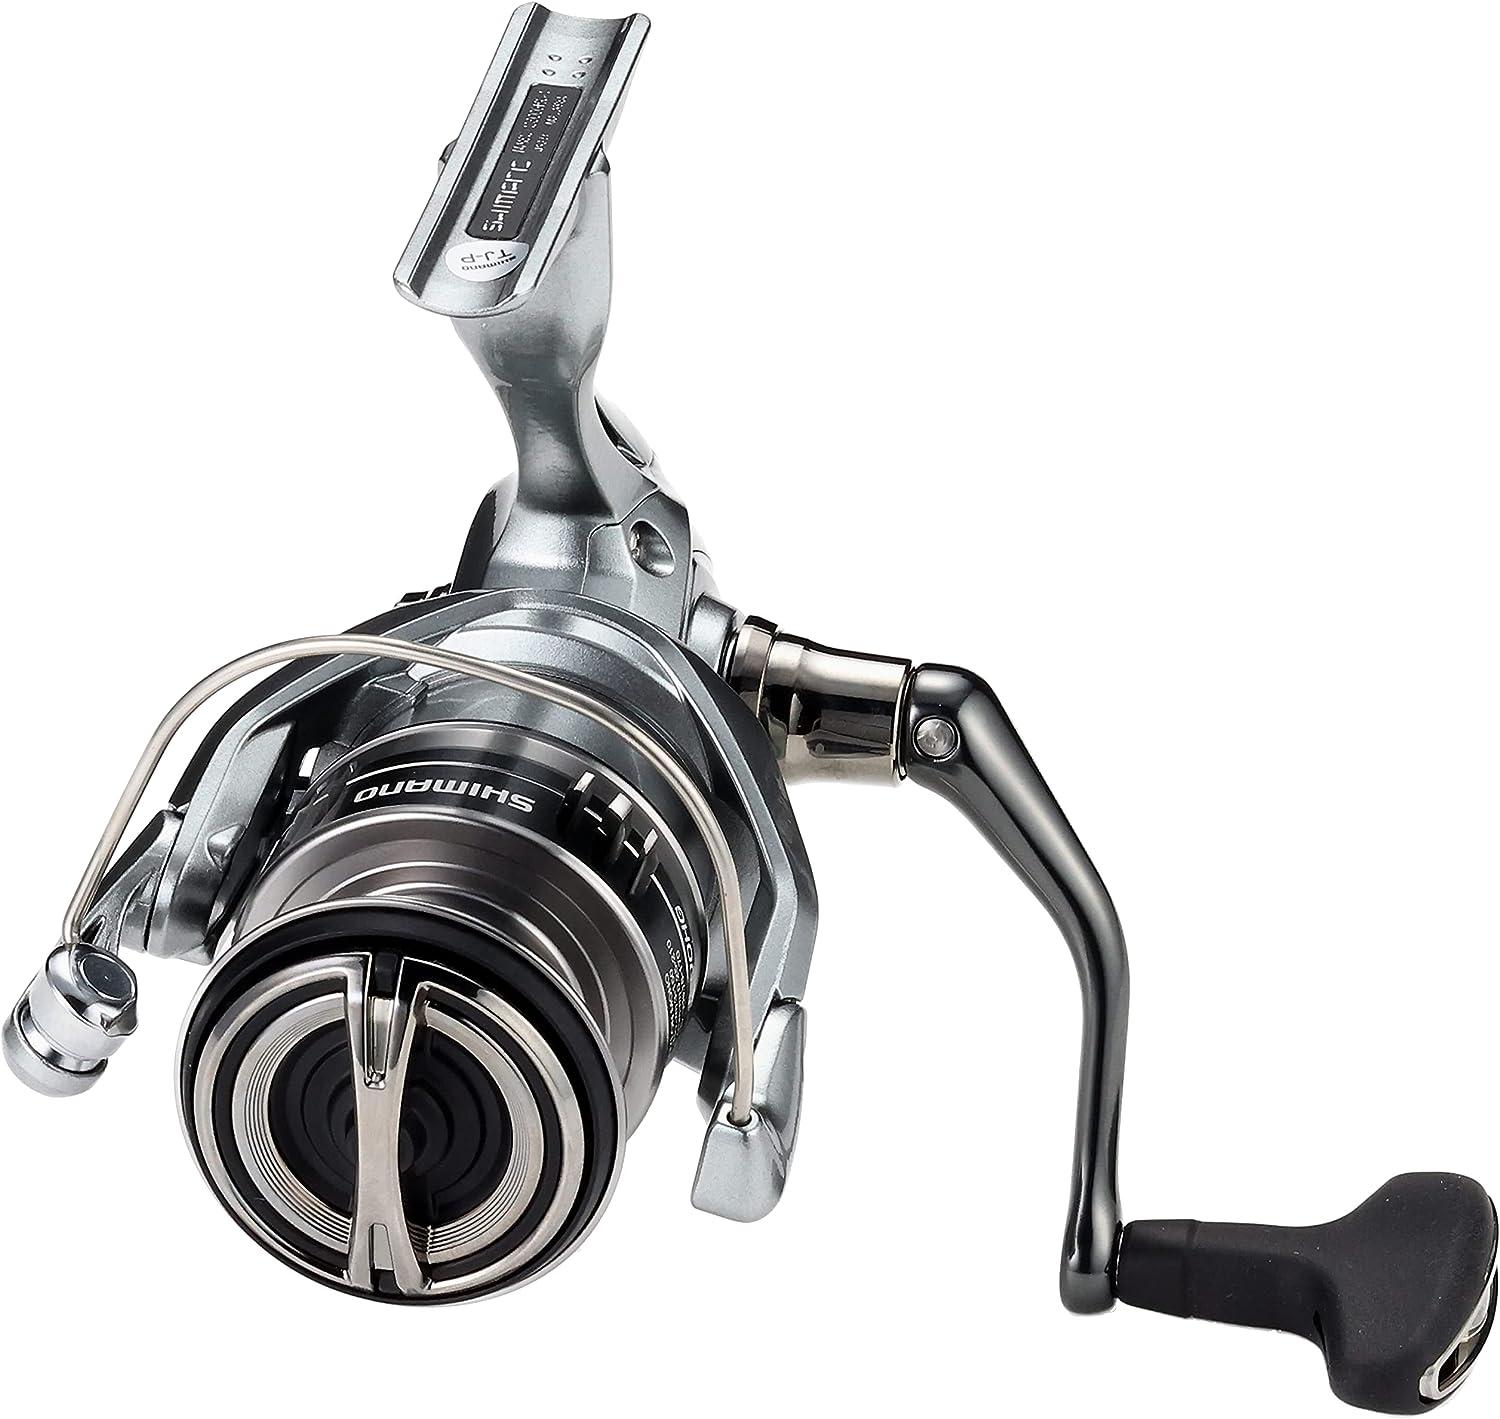 shimano reels japan, shimano reels japan Suppliers and Manufacturers at